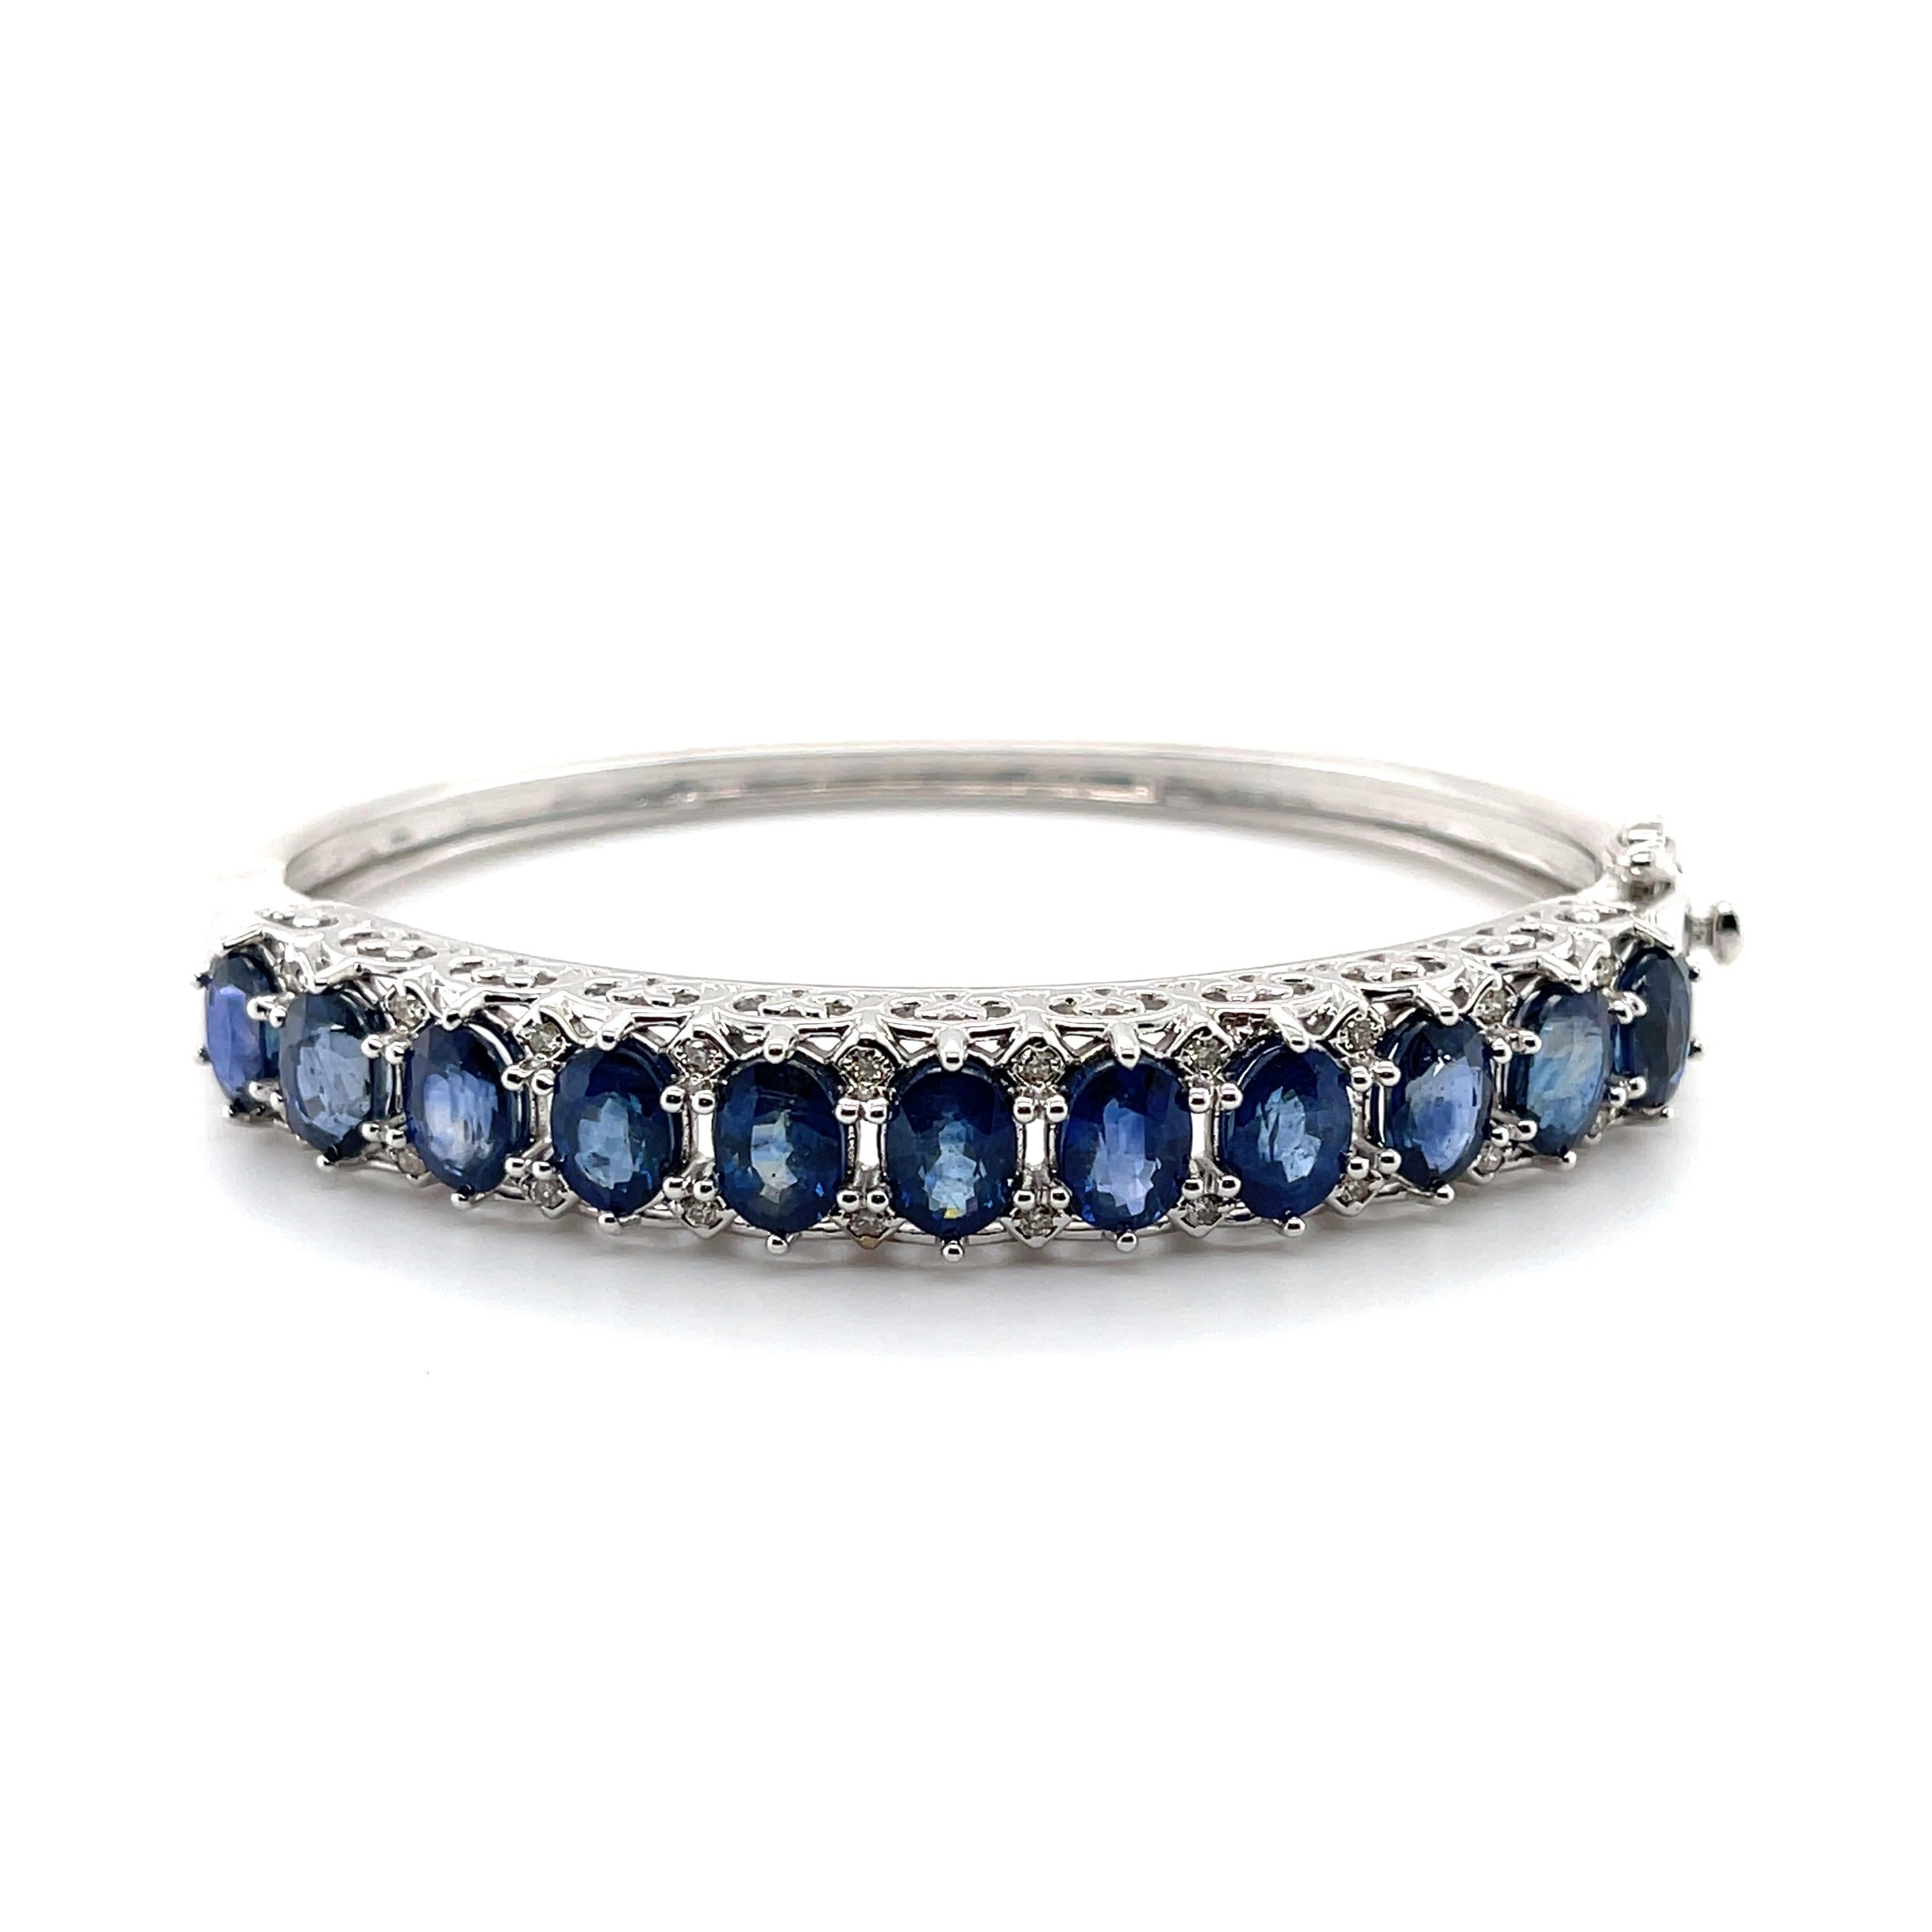 Oval shaped blue sapphires, crafted with Fourteen Karat white gold, featuring beautifully bead set round brilliant cut diamonds, complemented by a stunning polished finish design. 

Sapphire Weight: 13.80ct

Sapphire Colour: 